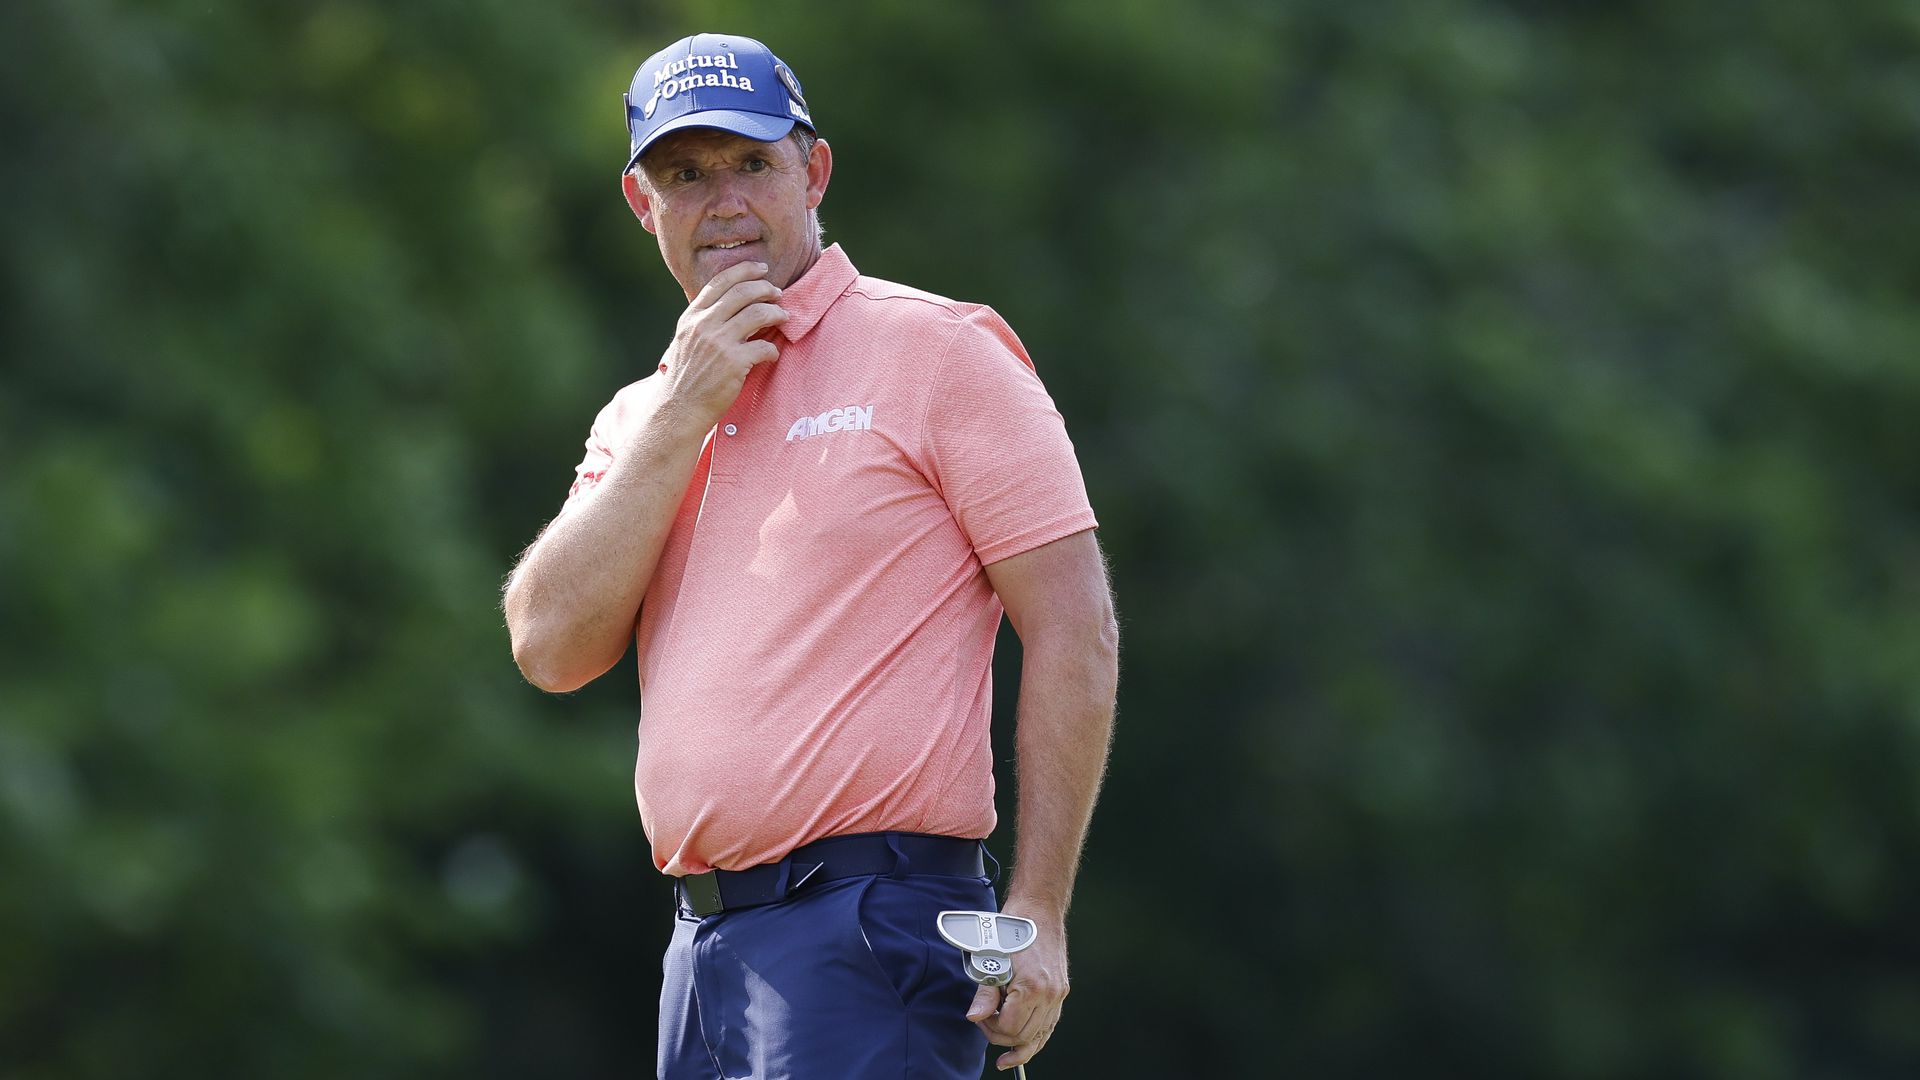 beloved pga tour pro calls out liv golf players for excessive cursing at masters